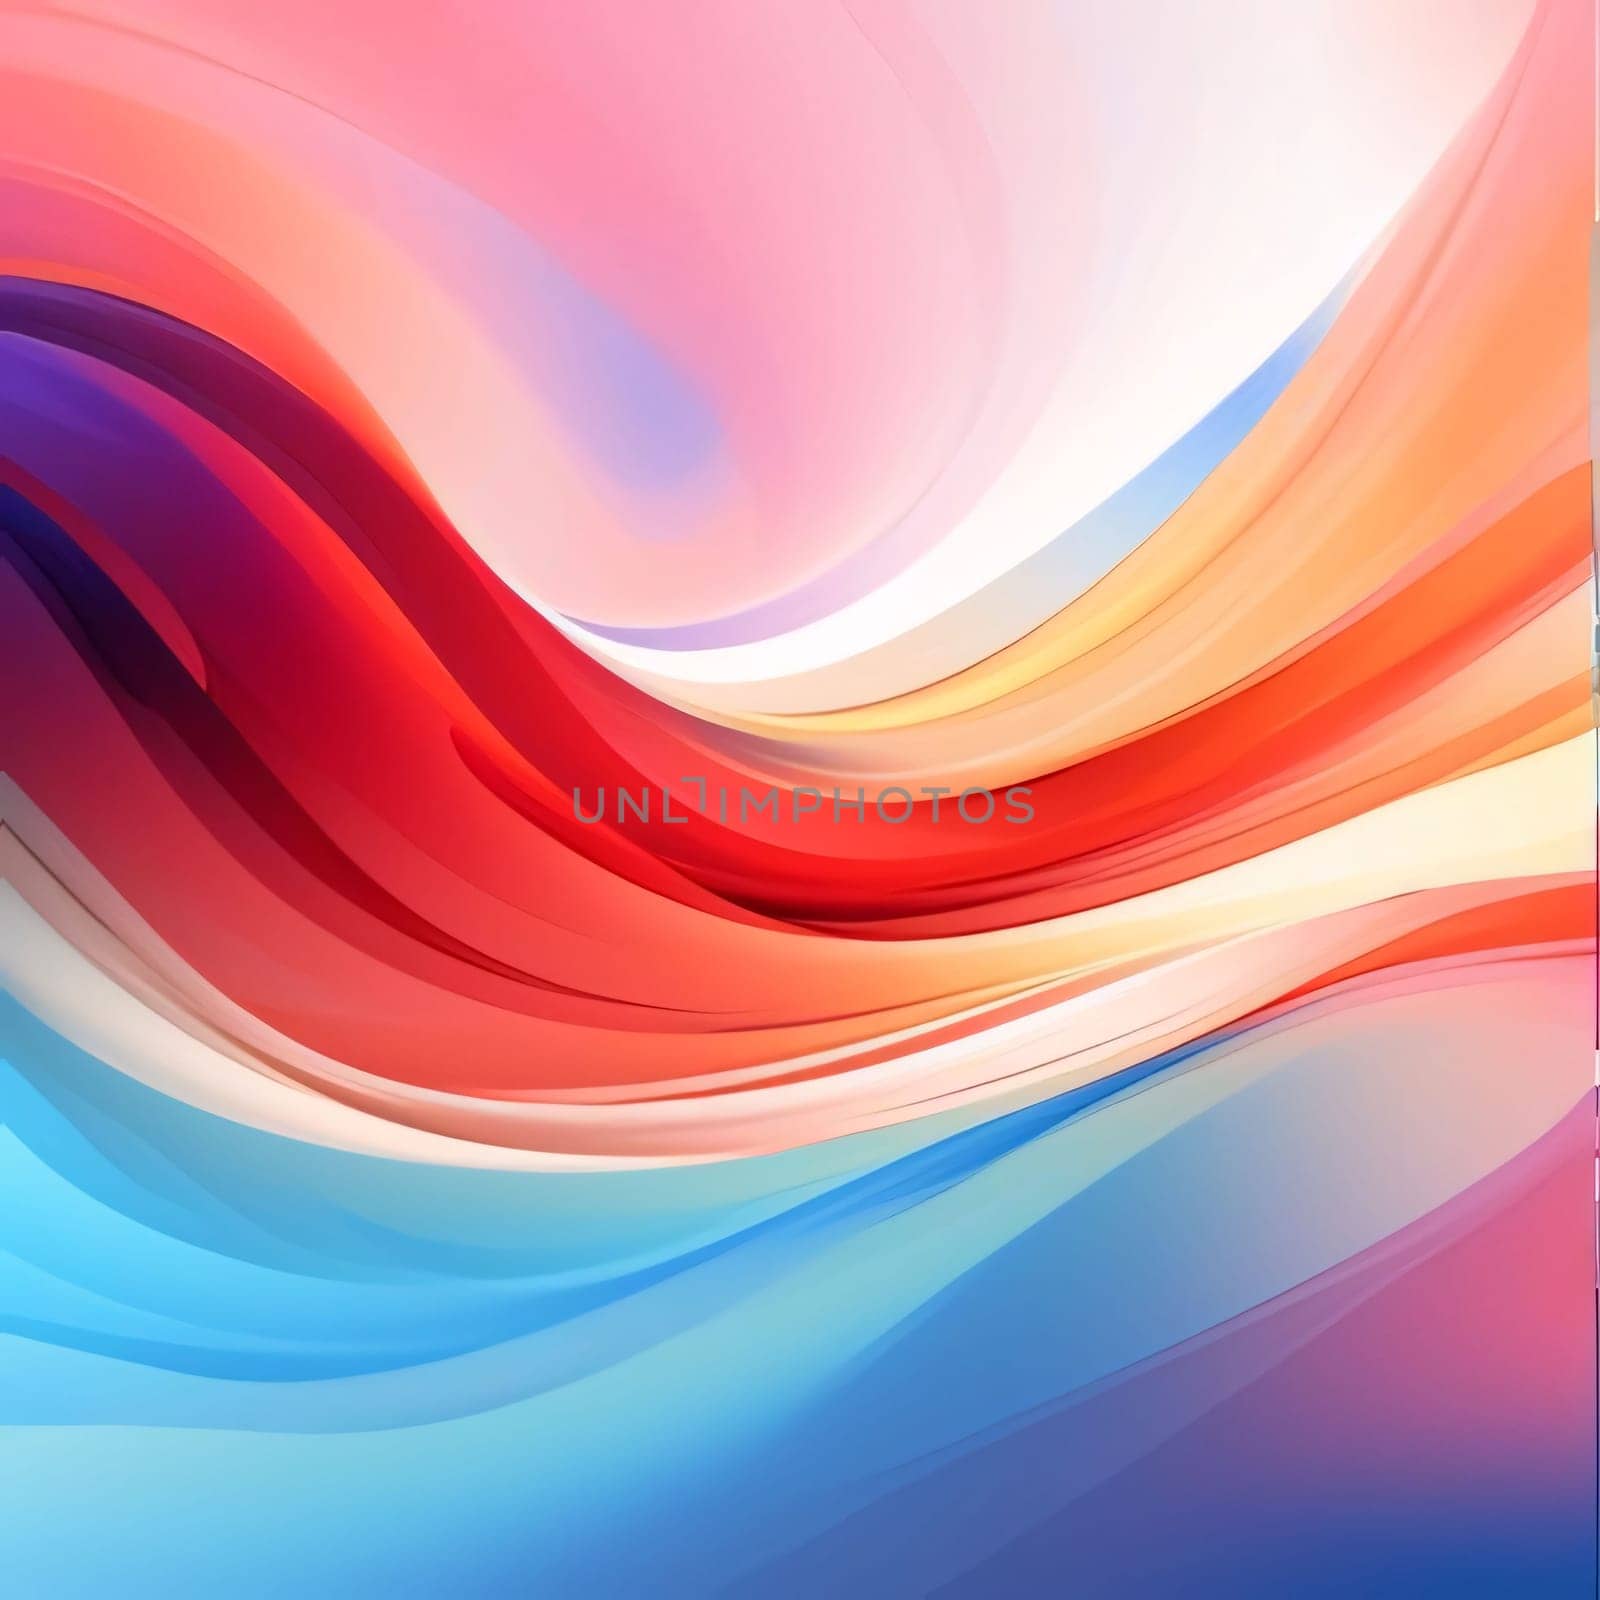 Abstract background design: abstract background with smooth lines in blue, orange and pink colors